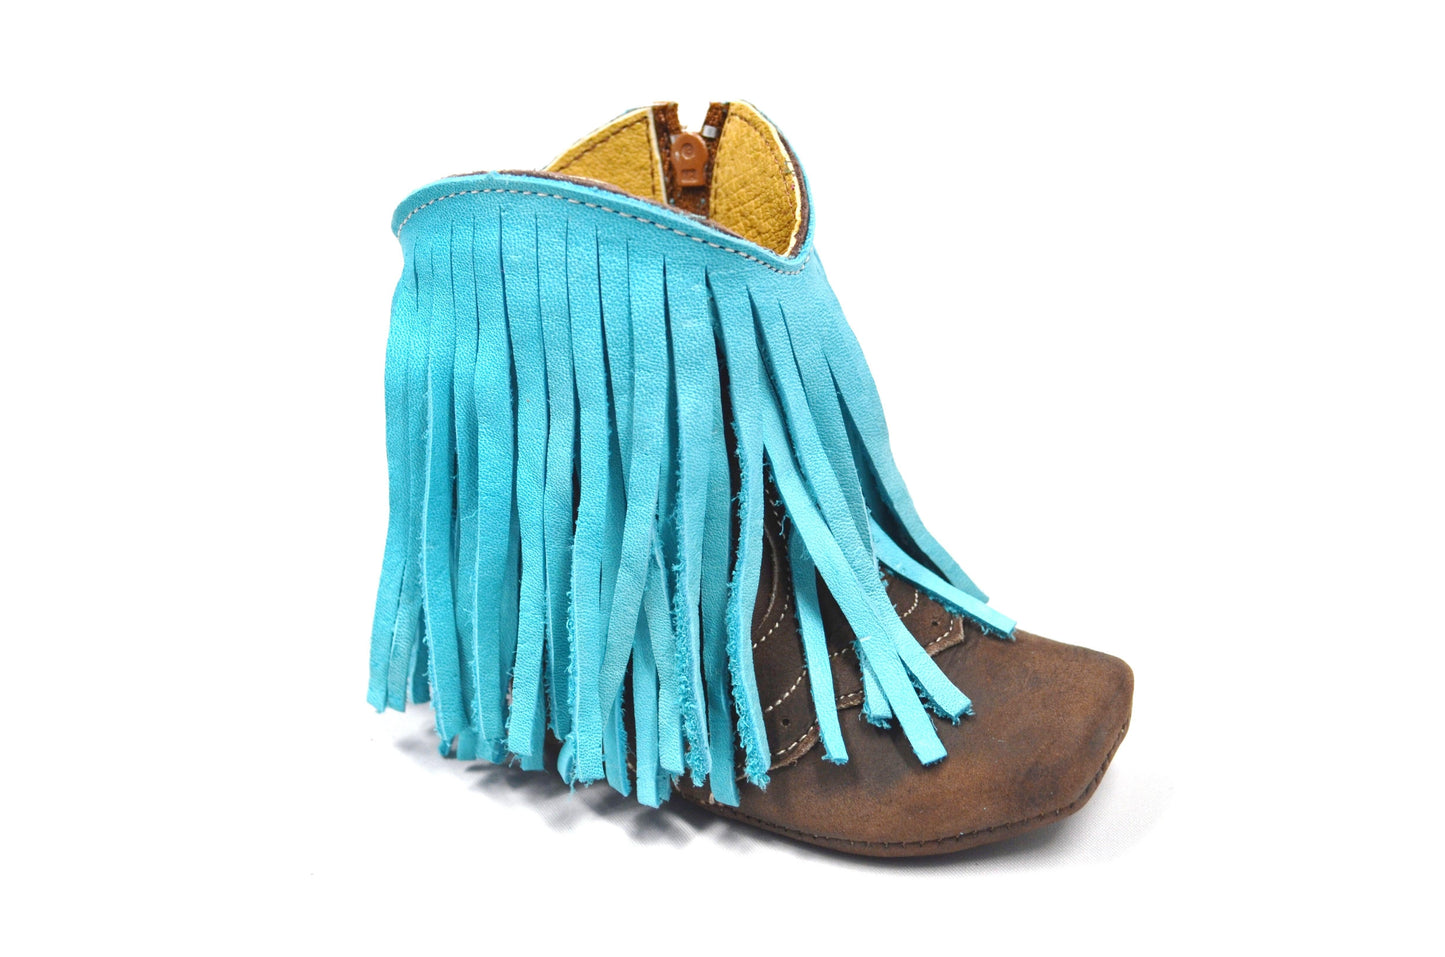 Boot Kids DC (372) - Lil' Cowpoke Infant Boots in Turquoise Fringe